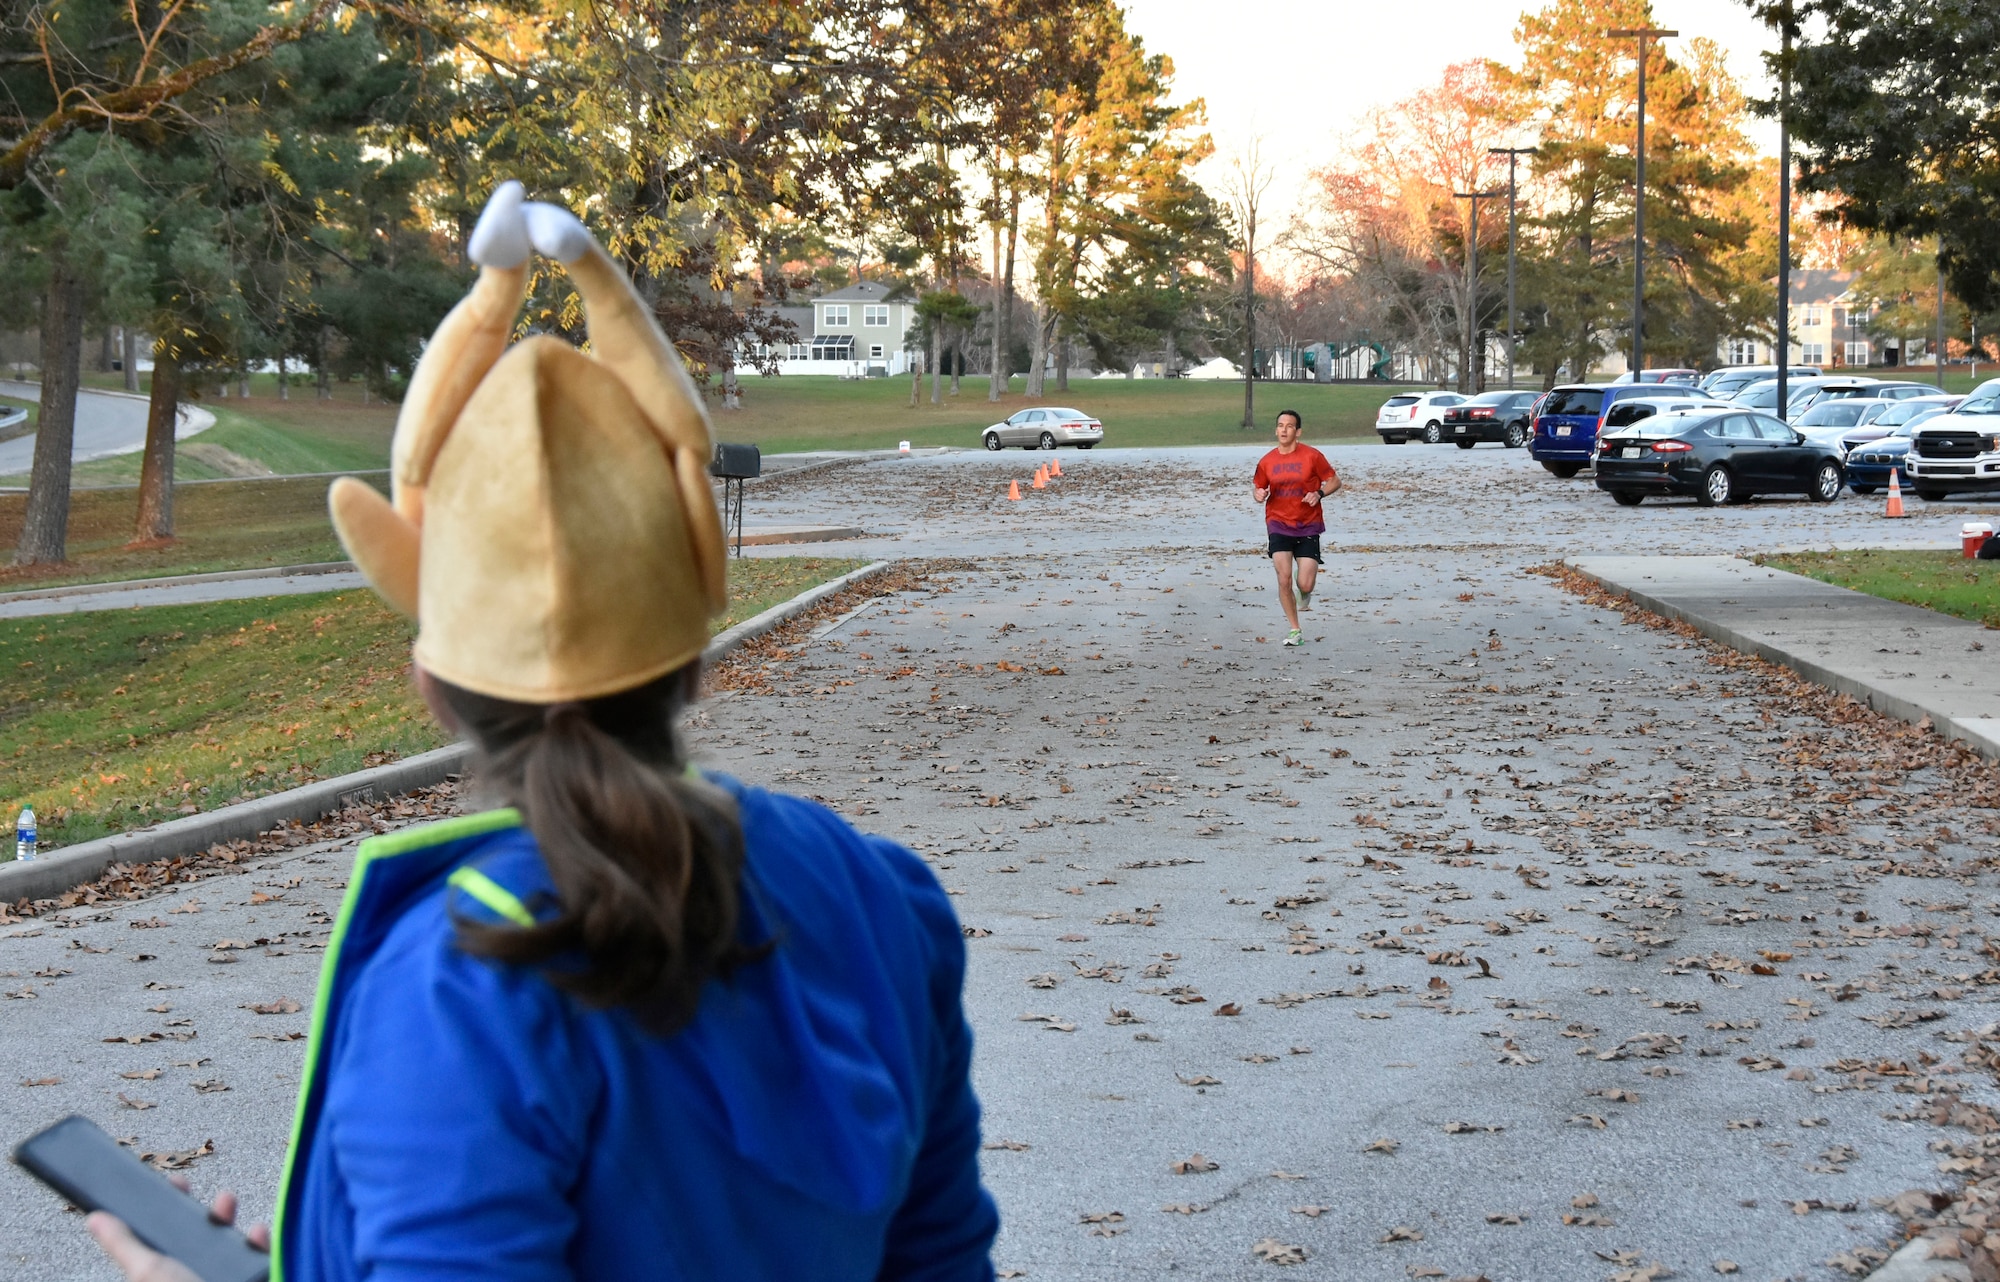 AEDC Commander Col. Jeffrey Geraghty nears the finish line as Capt. Elizabeth Sewell prepares to record his time during the 35th annual AEDC Turkey Trot, Nov. 13, 2020, at the Arnold Lakeside Complex on Arnold Air Force Base, Tenn. (U.S. Air Force photo by Bradley Hicks)